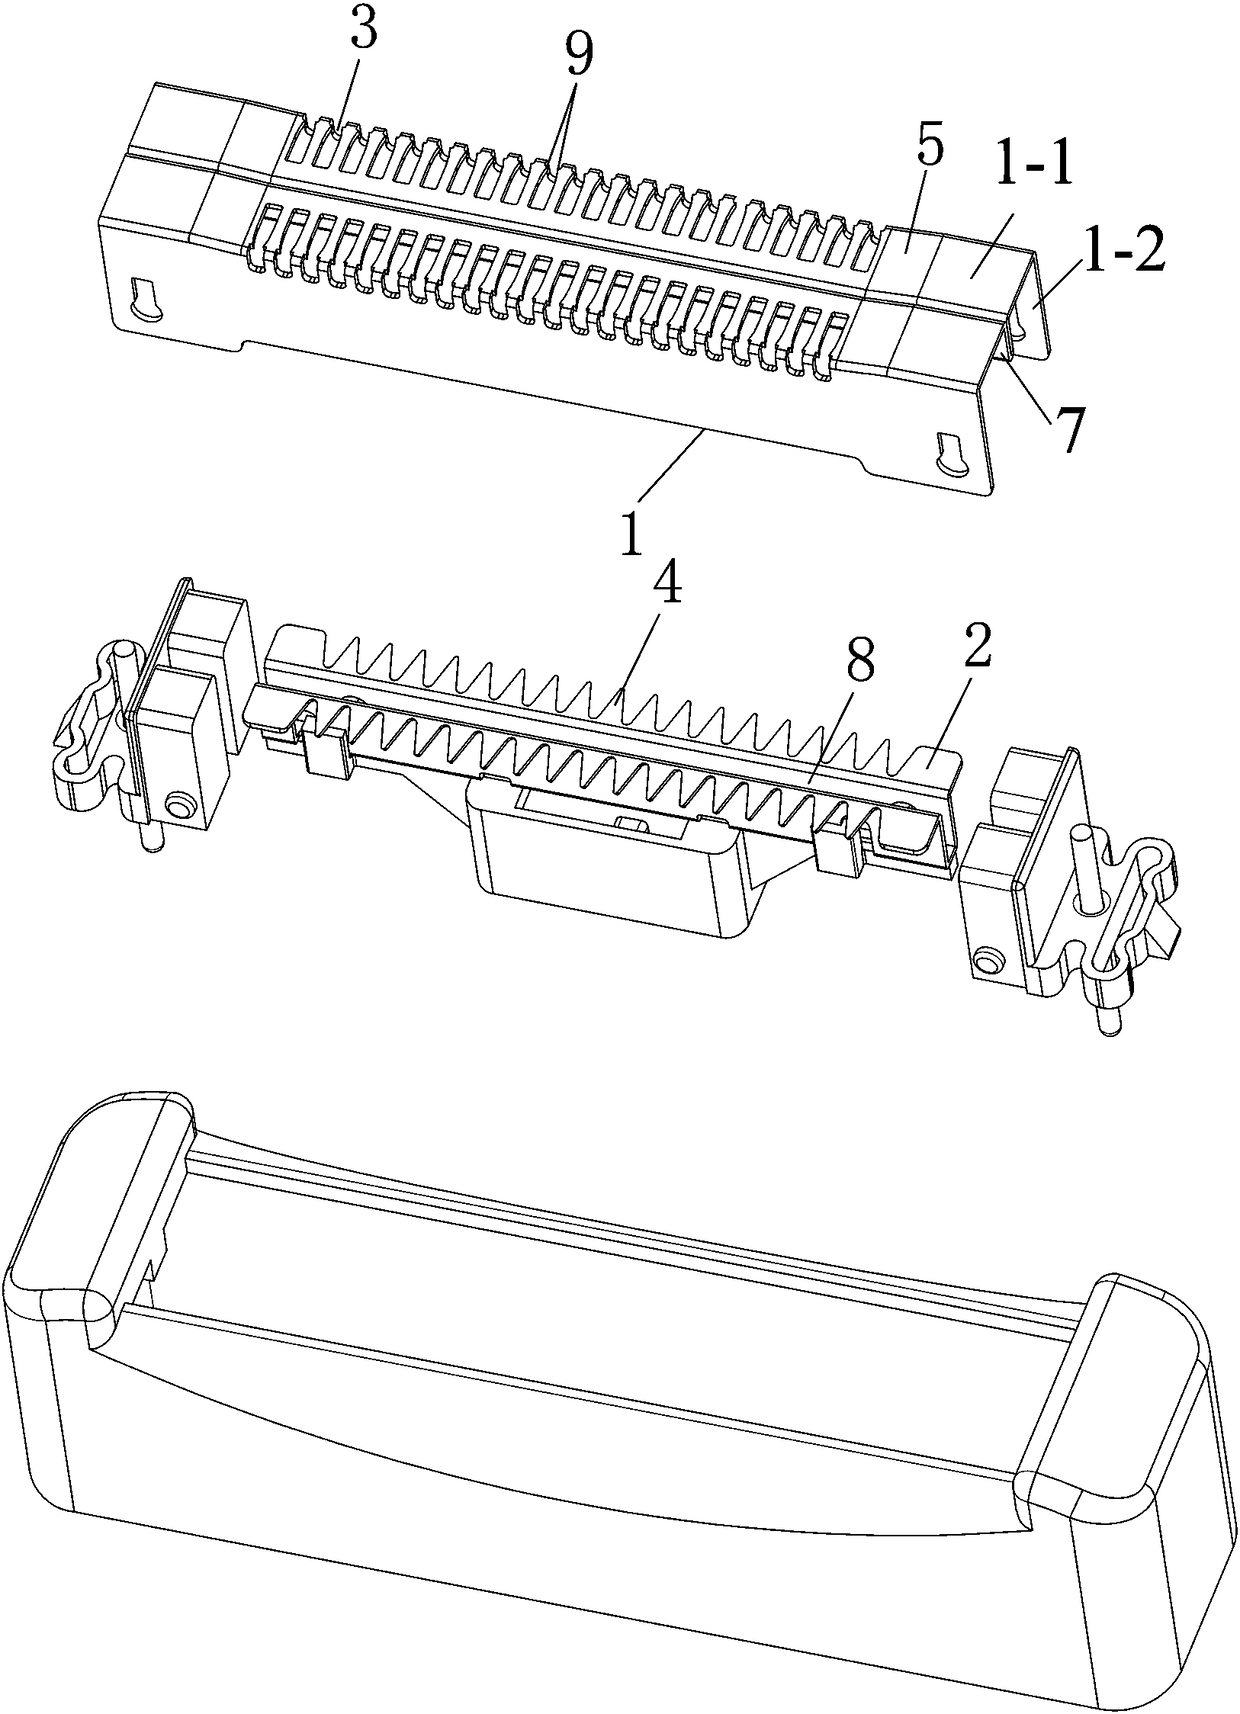 Reciprocating type hair cutting device